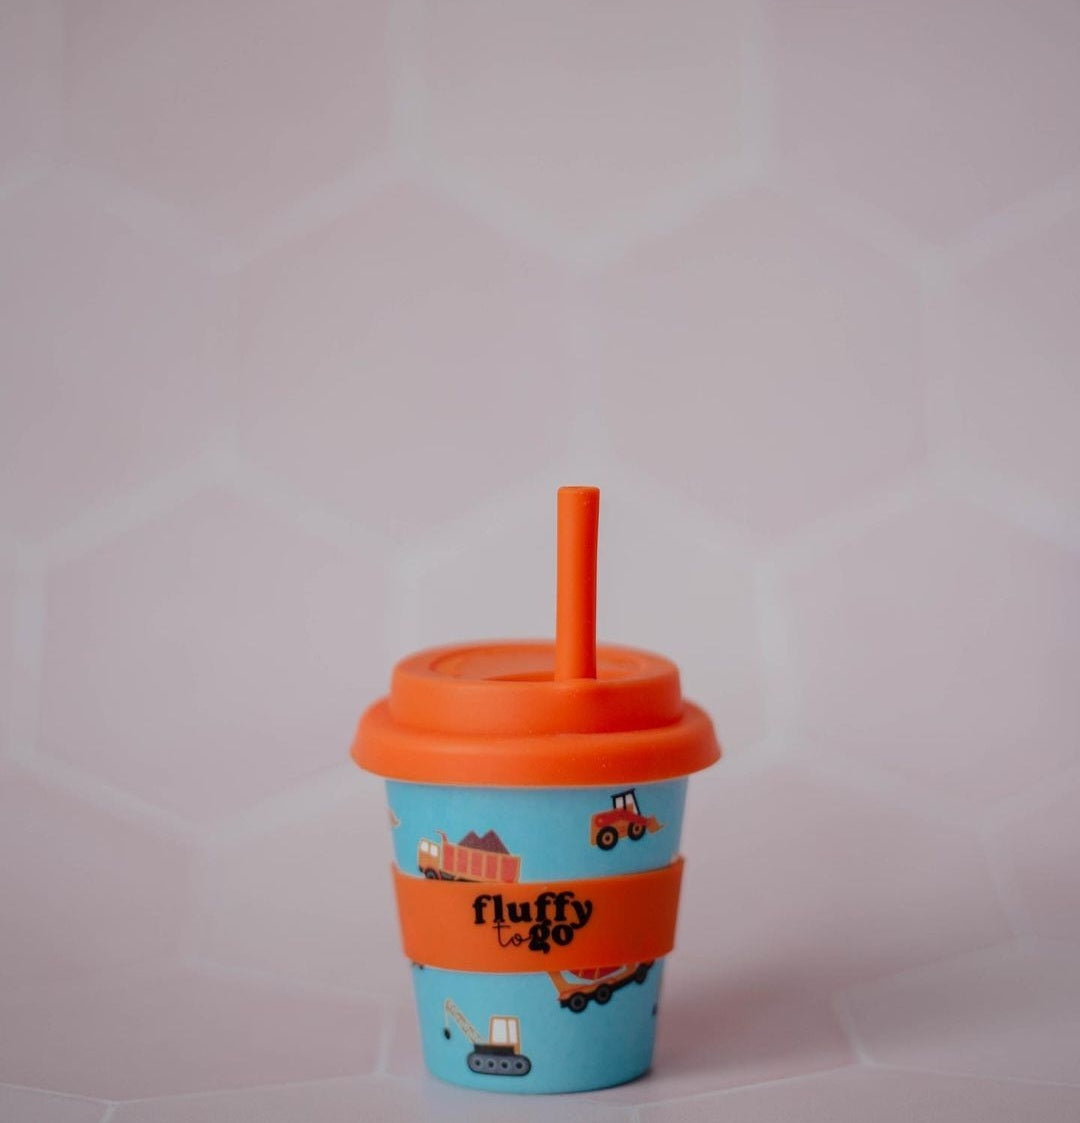 Fluffy Cup - All About Construction